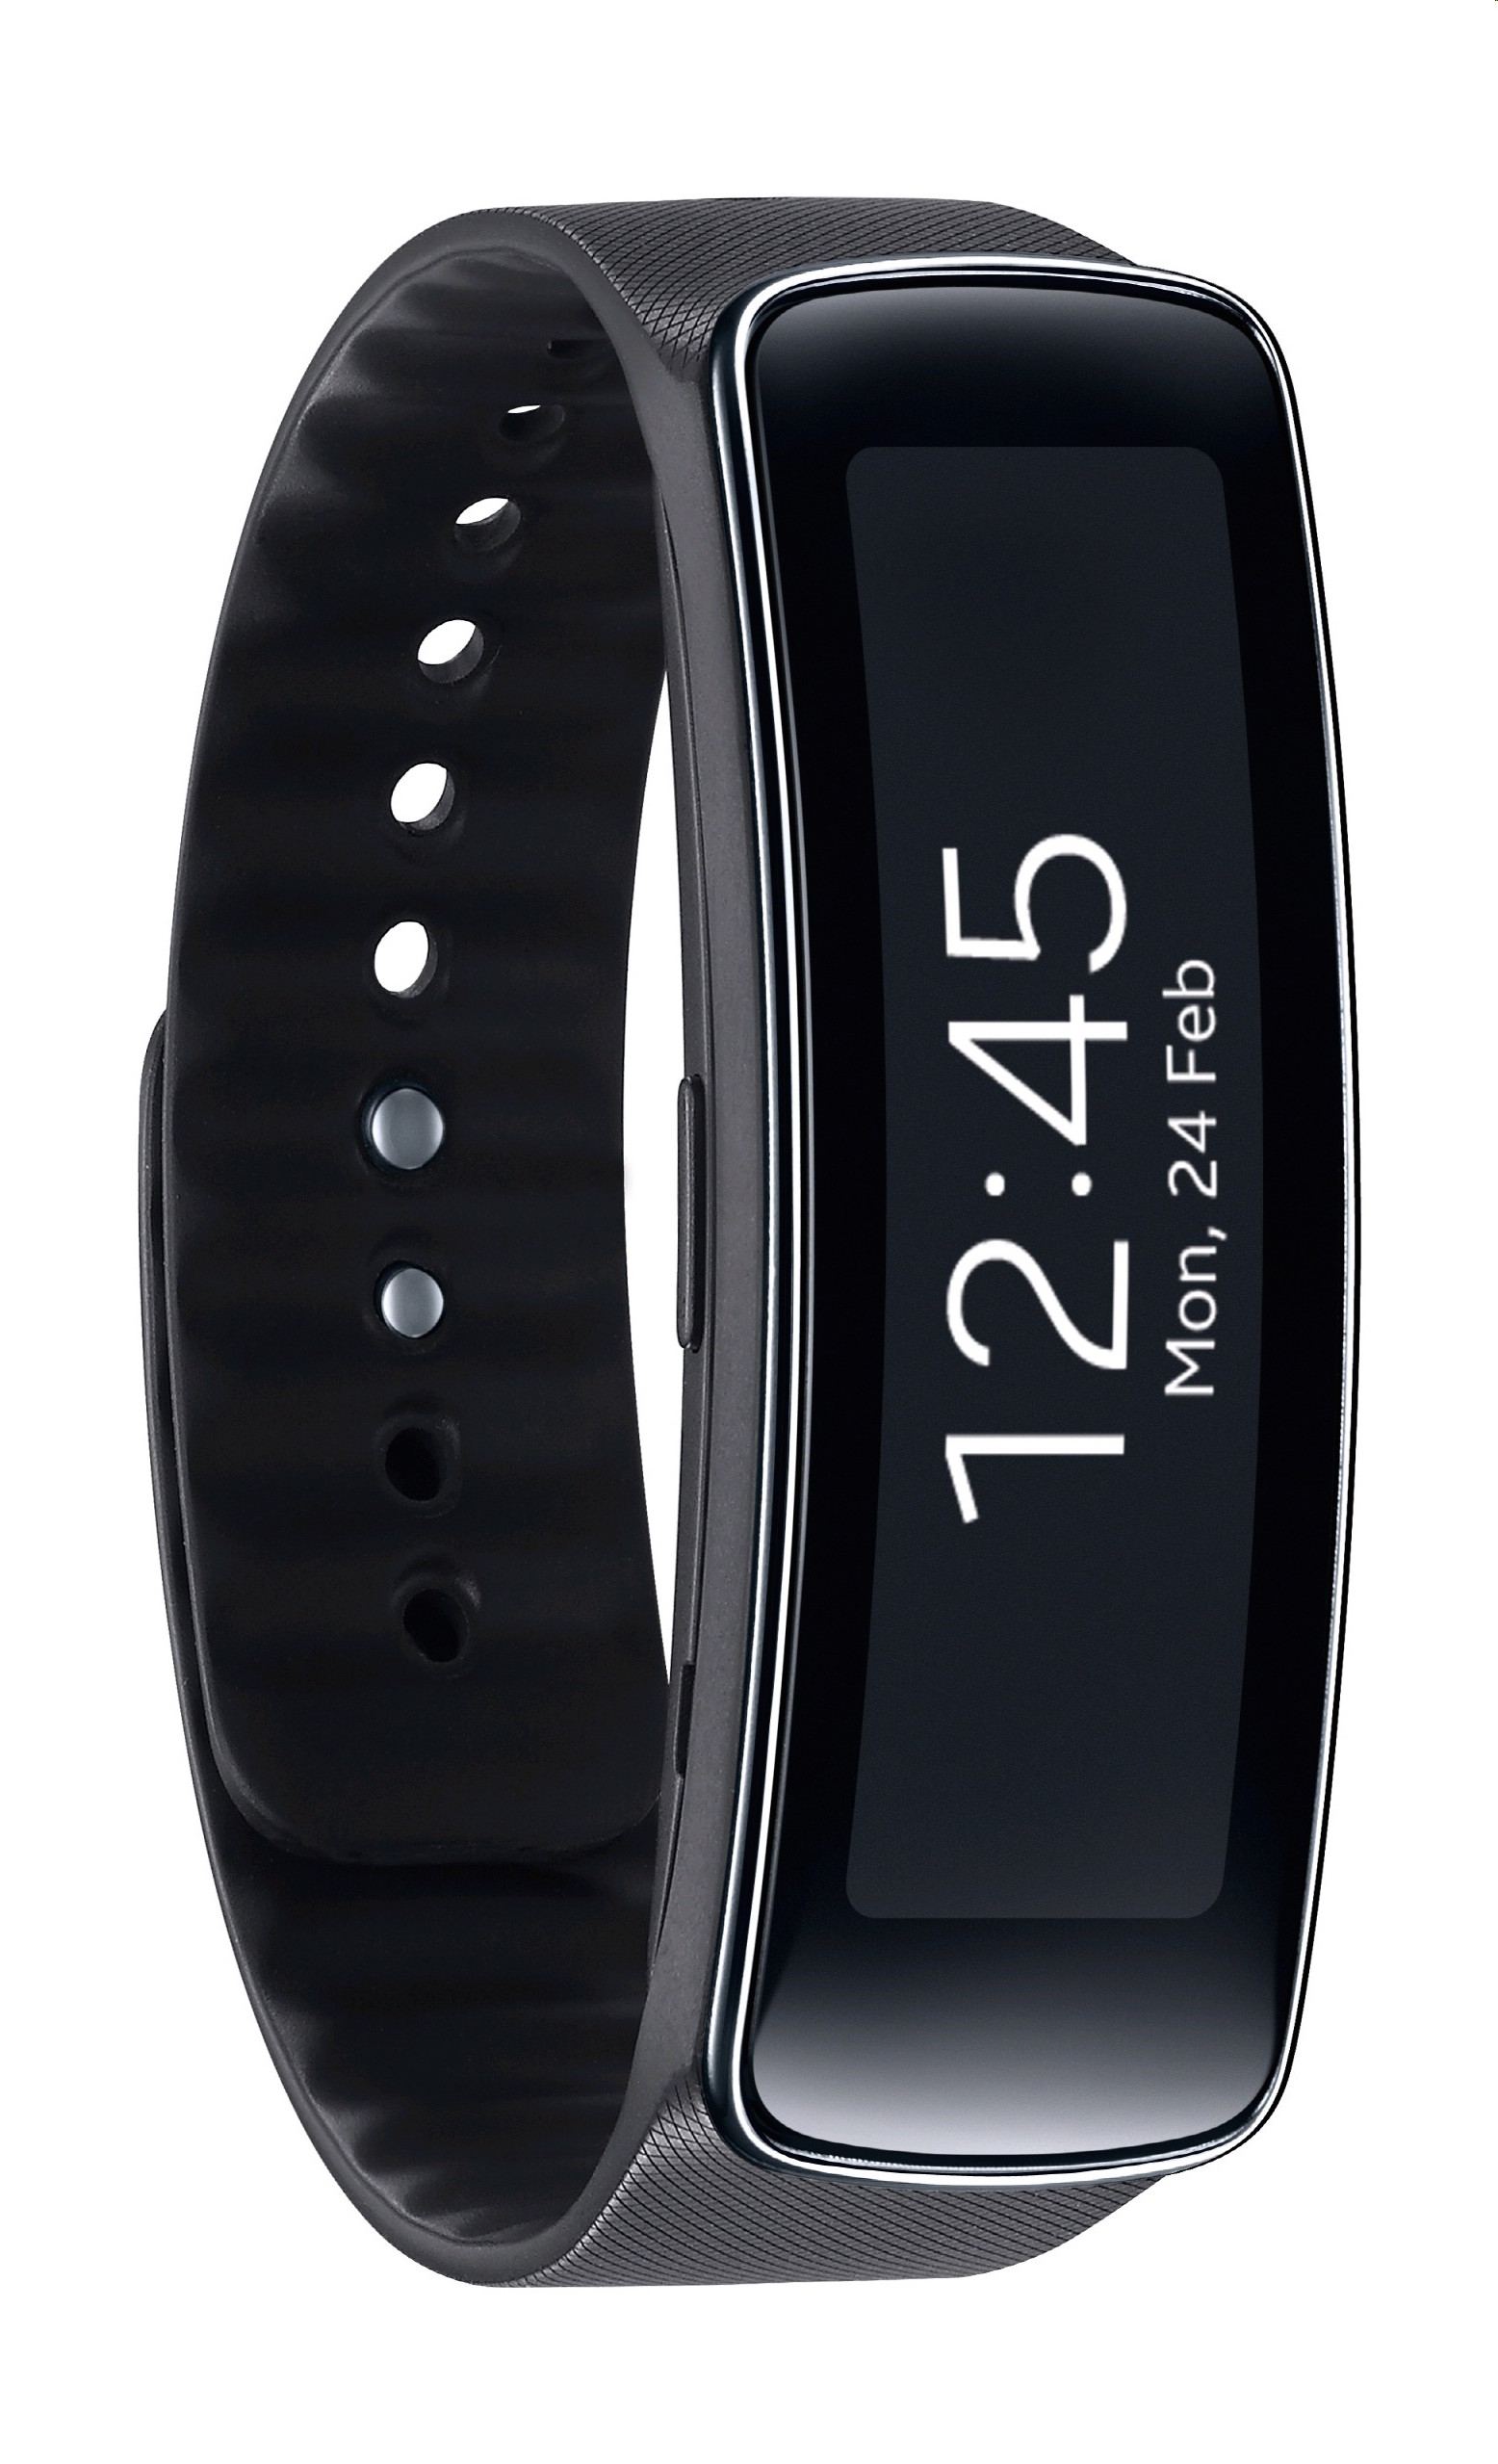 Samsung Gear Fit (Black) for Android